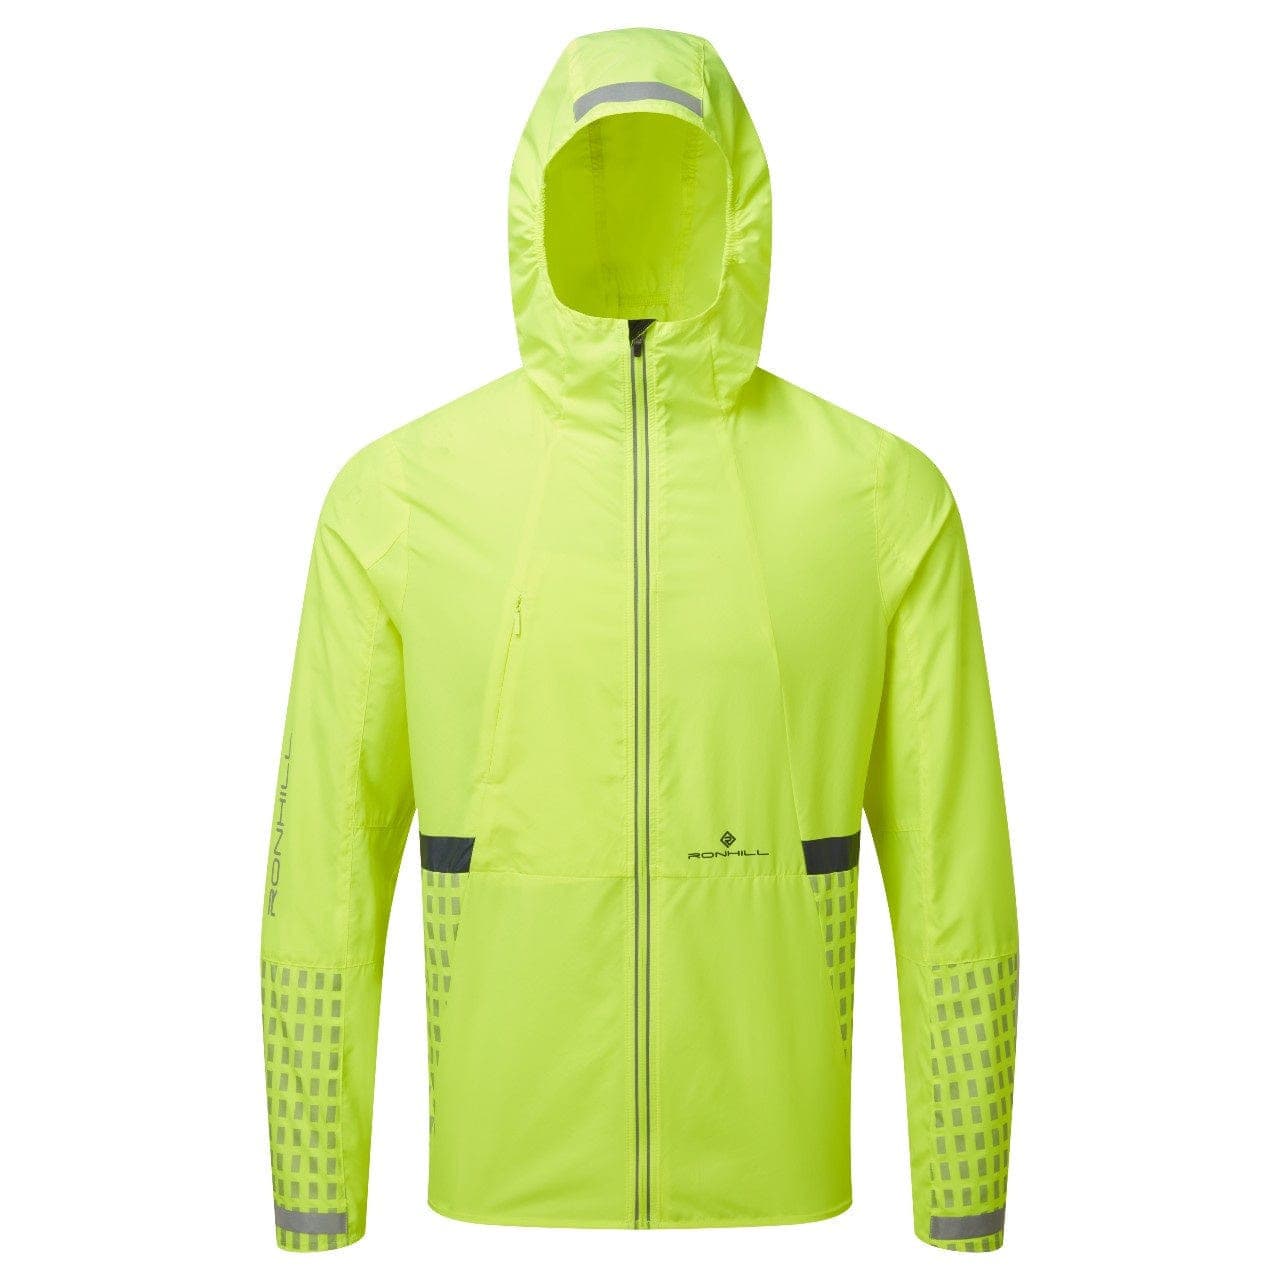 Ronhill Tech Afterhours Jacket (Mens) - Fluo Yellow/Charcoal/Reflective